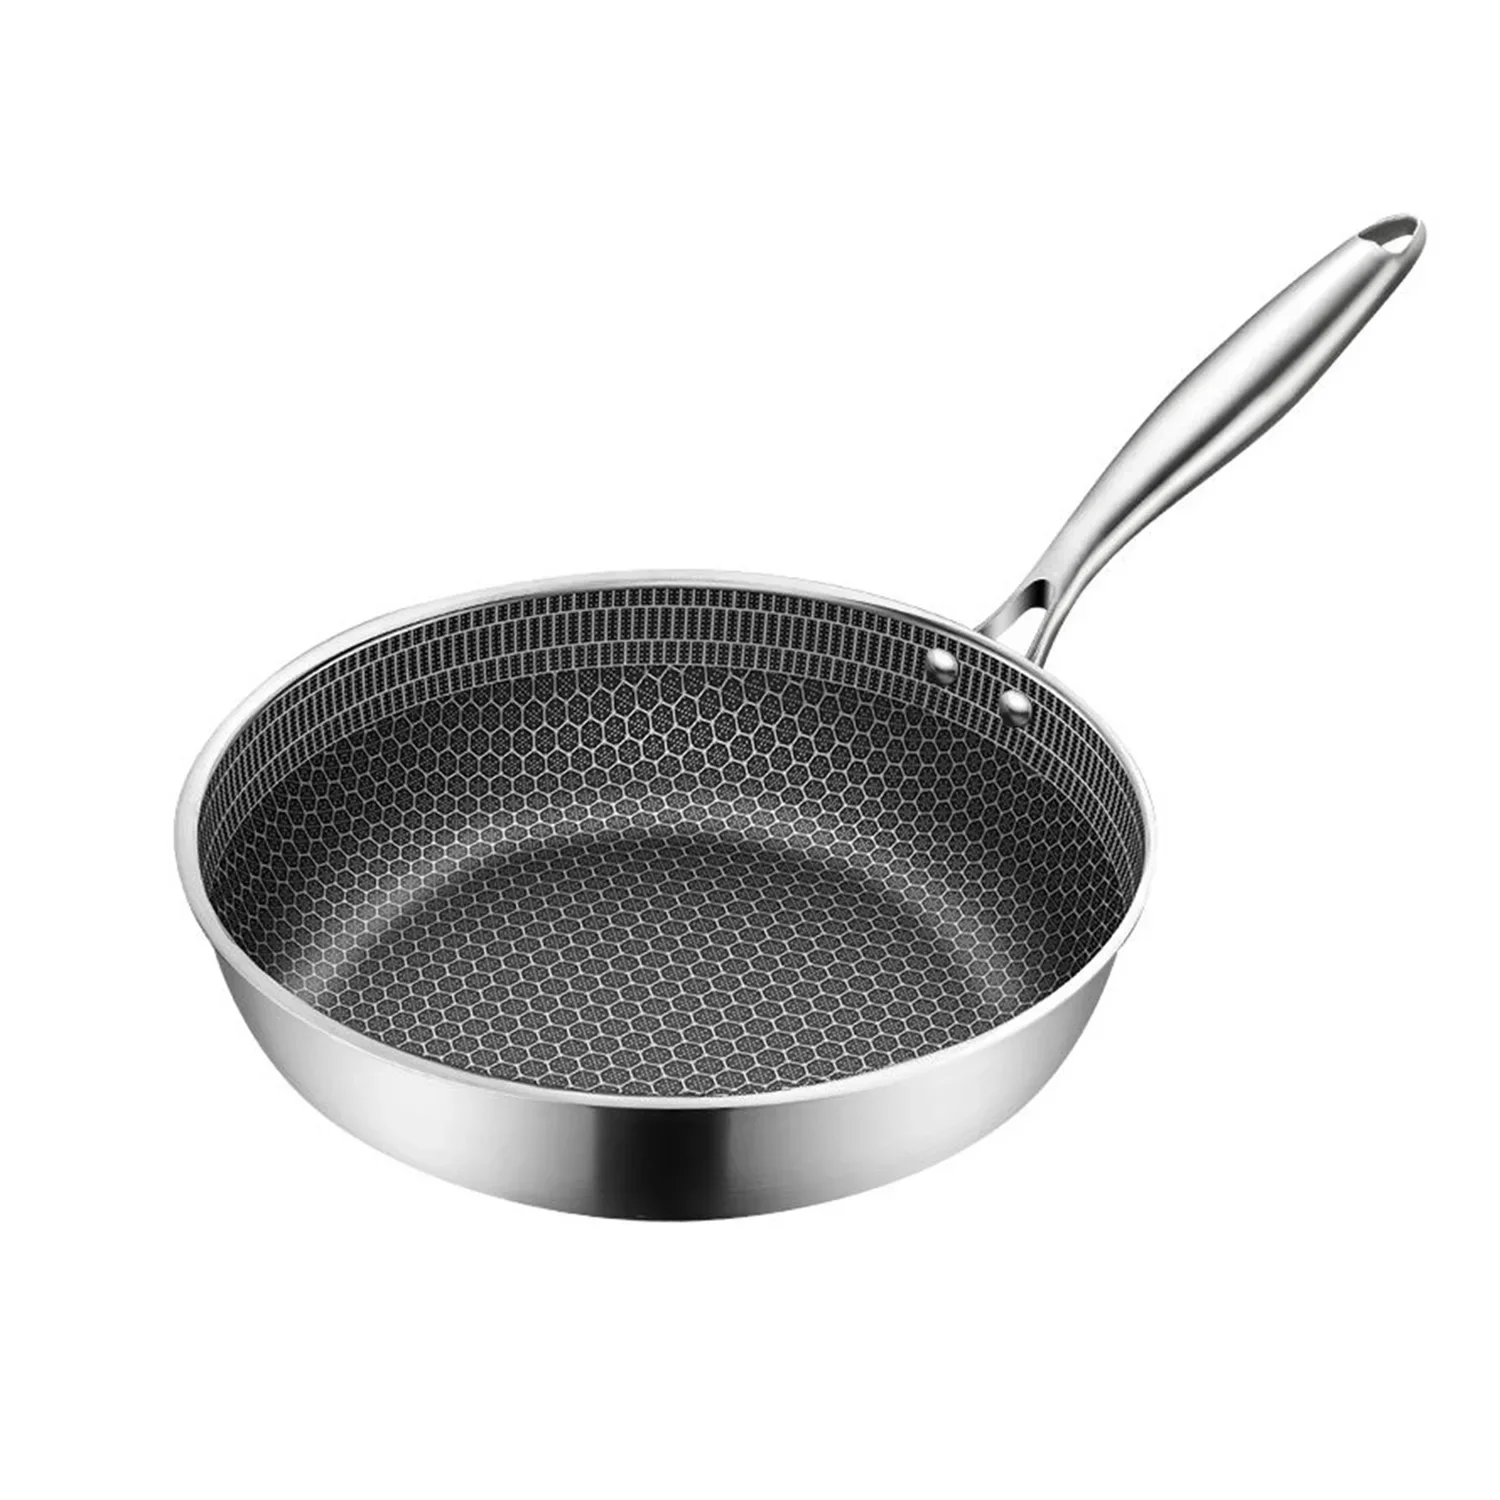 

Frying Pans 316 Stainless Steel Skillet Honeycomb Wok Pan Induction Cooker